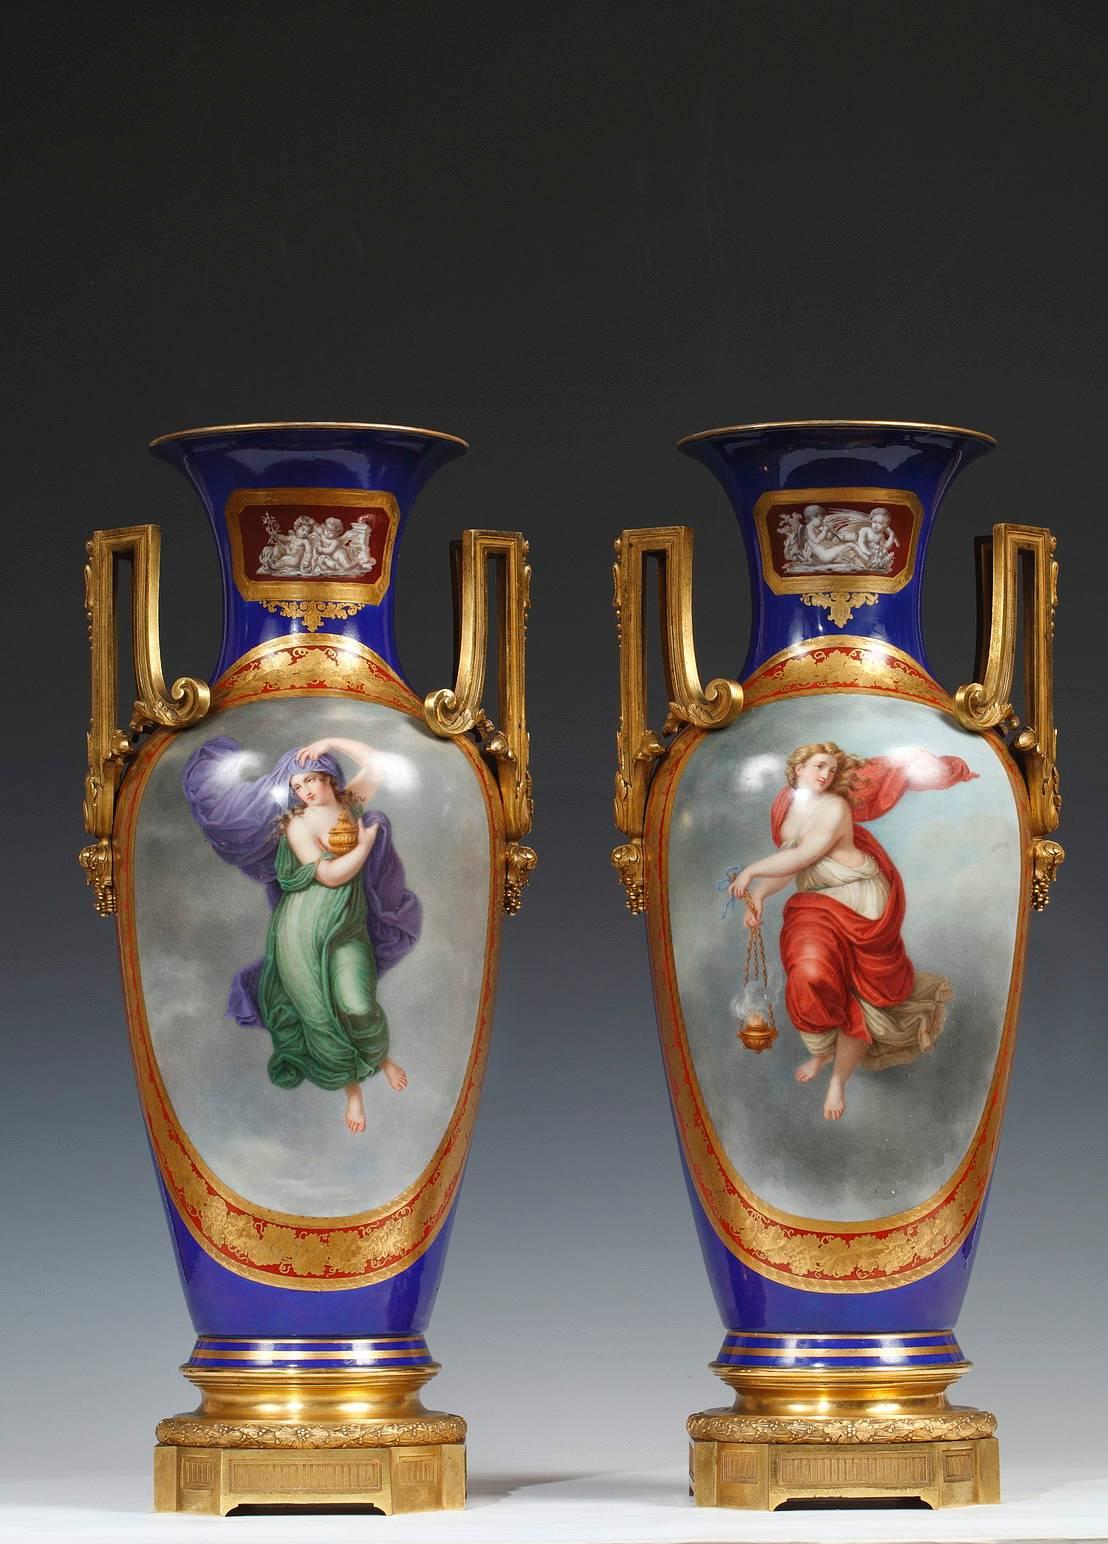 Painted Pair of Ormolu Porcelain Vases by the Royal Porcelain Manufacture of Berlin For Sale